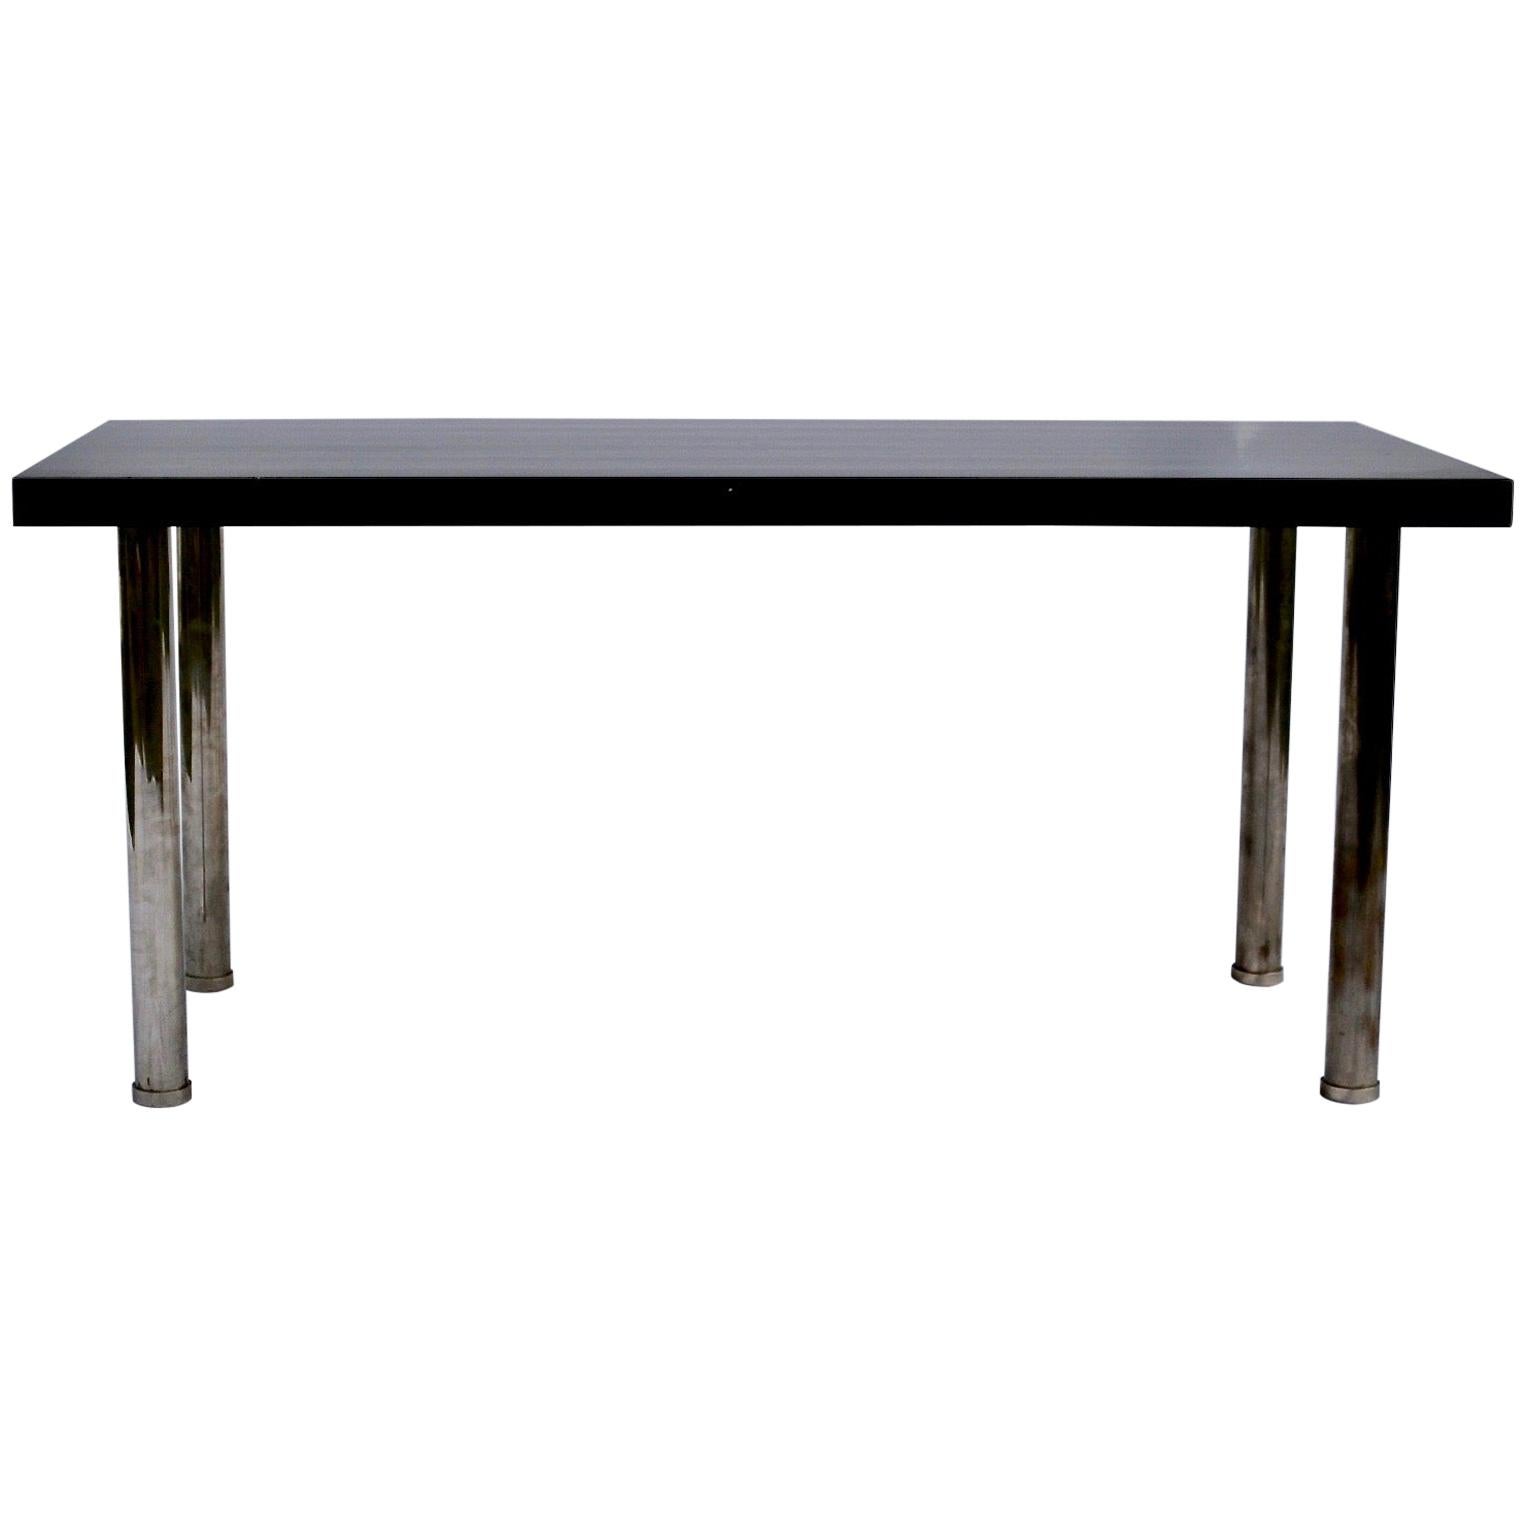 Art Deco Table Made by NK 'Nordiska Kompaniet', Made 1932 For Sale